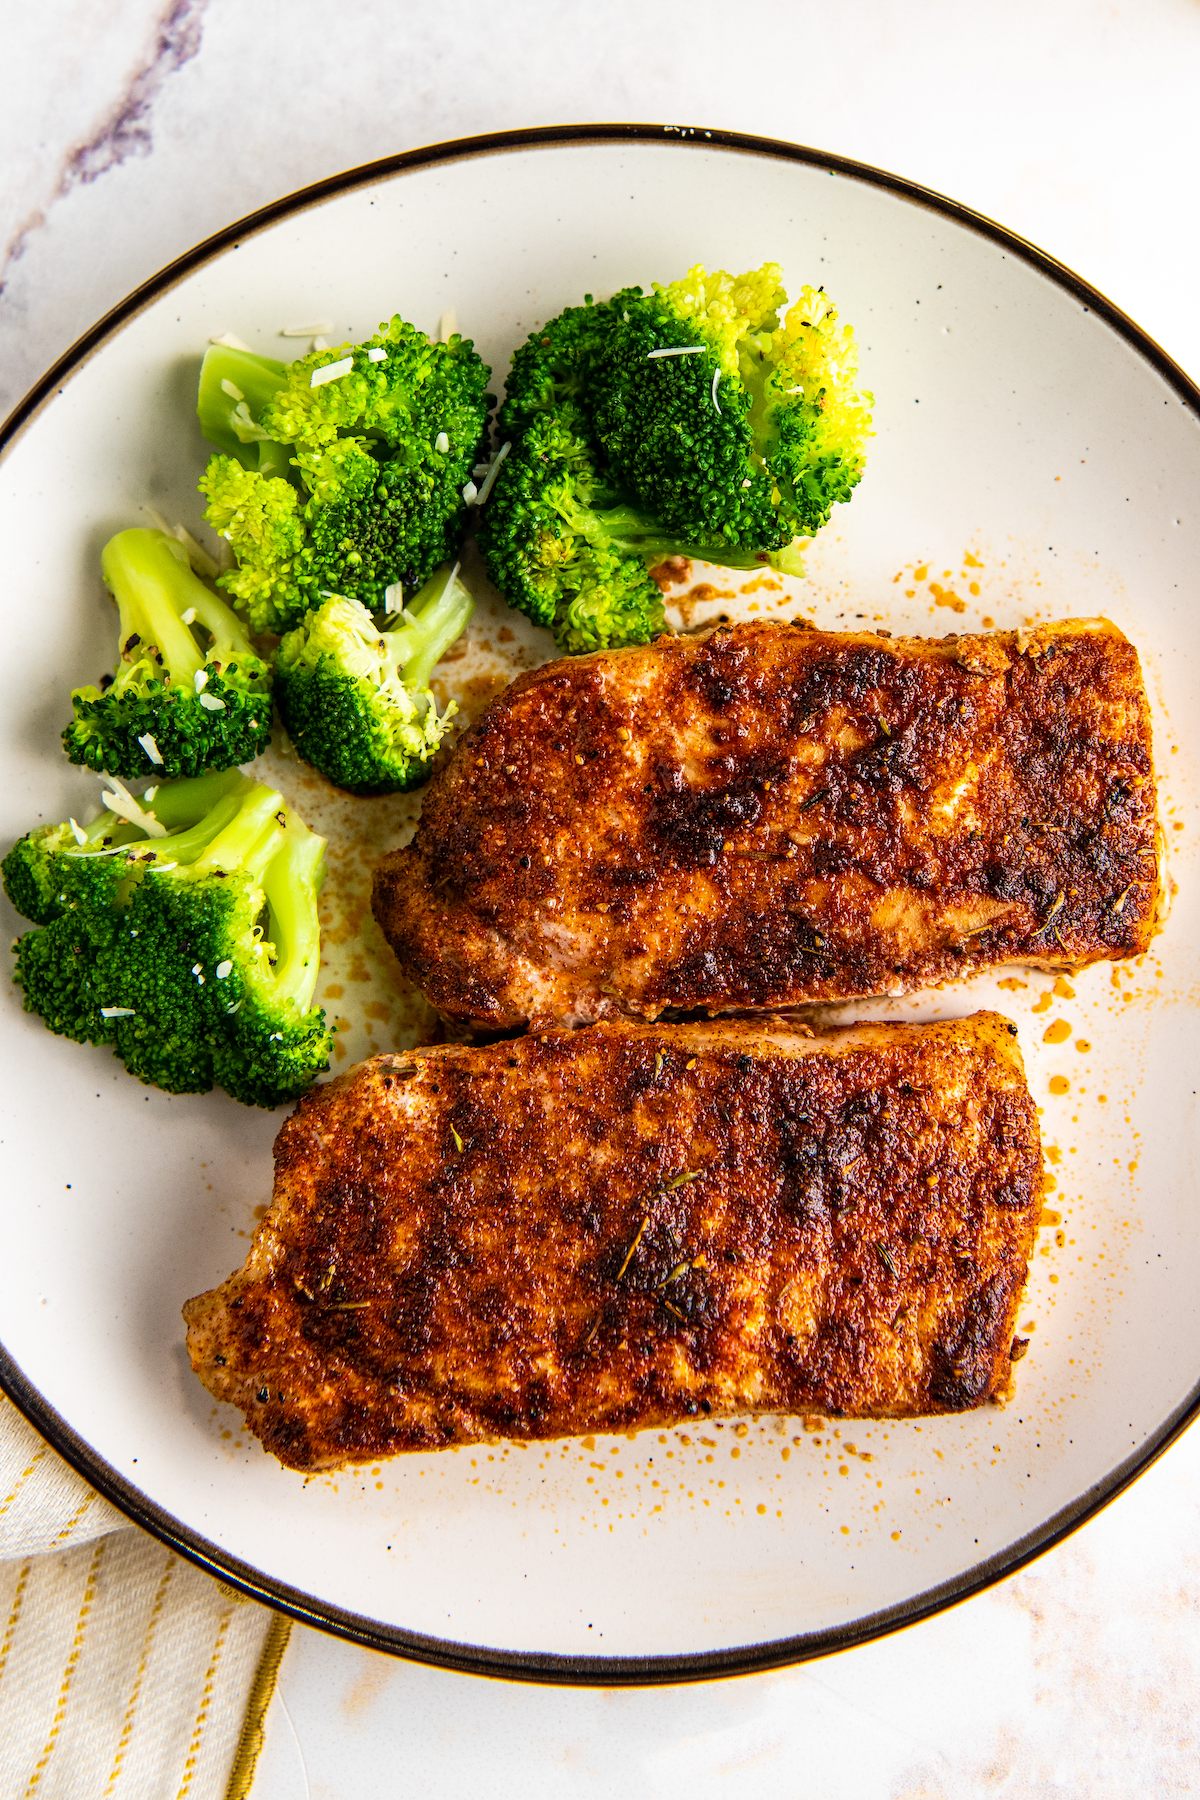 Pork chops on a plate with steamed broccoli.